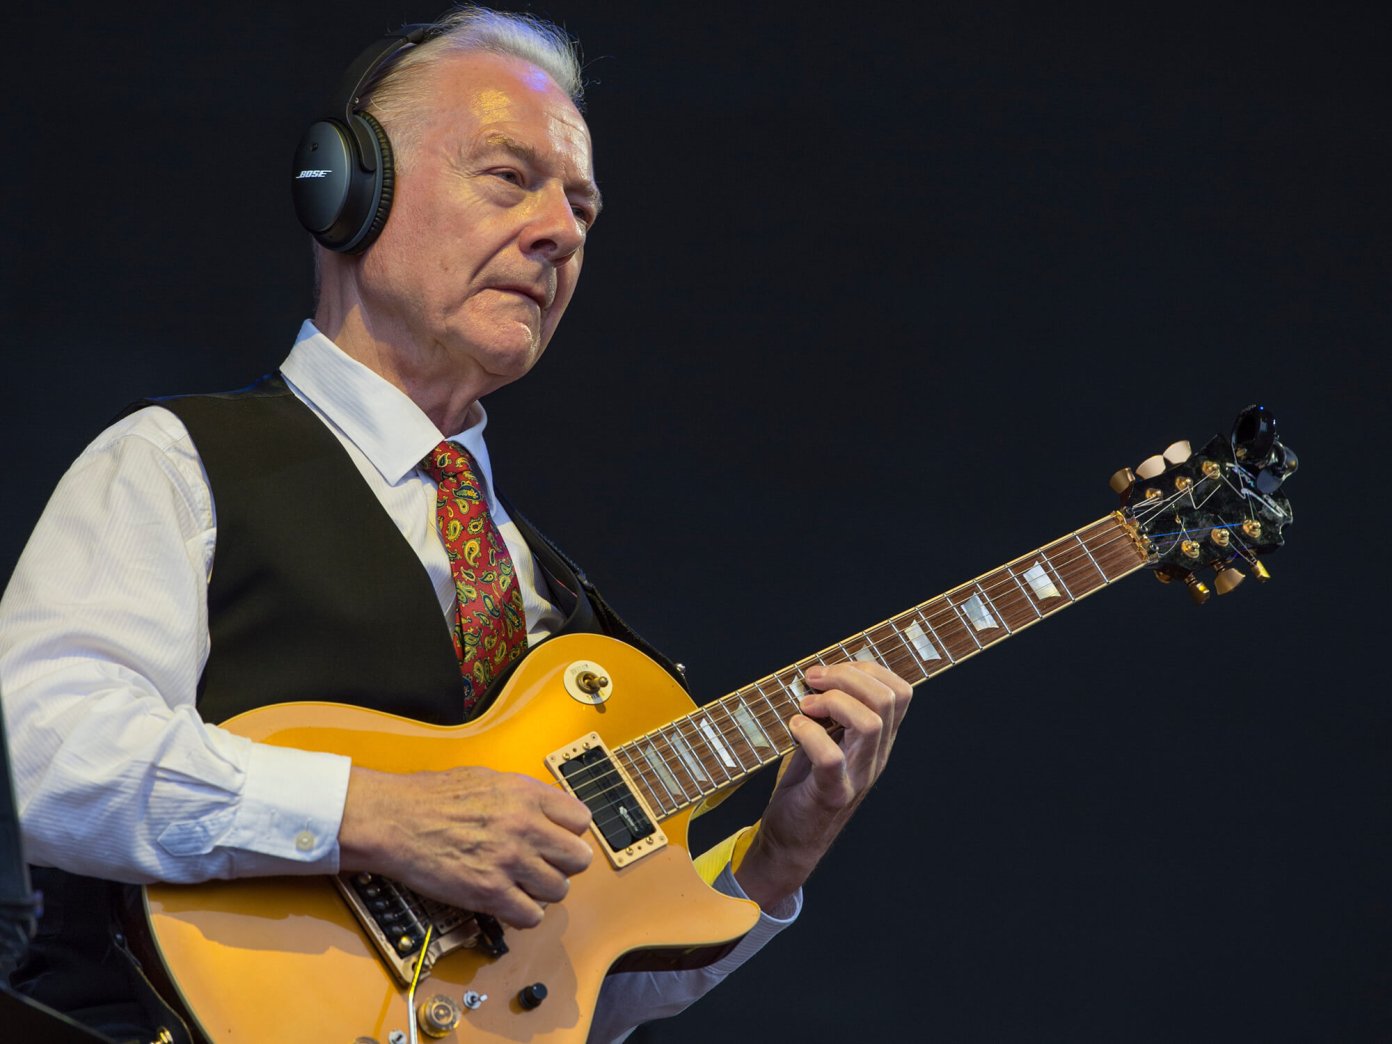 “There are King Crimson fans who have been outraged at my conduct ...